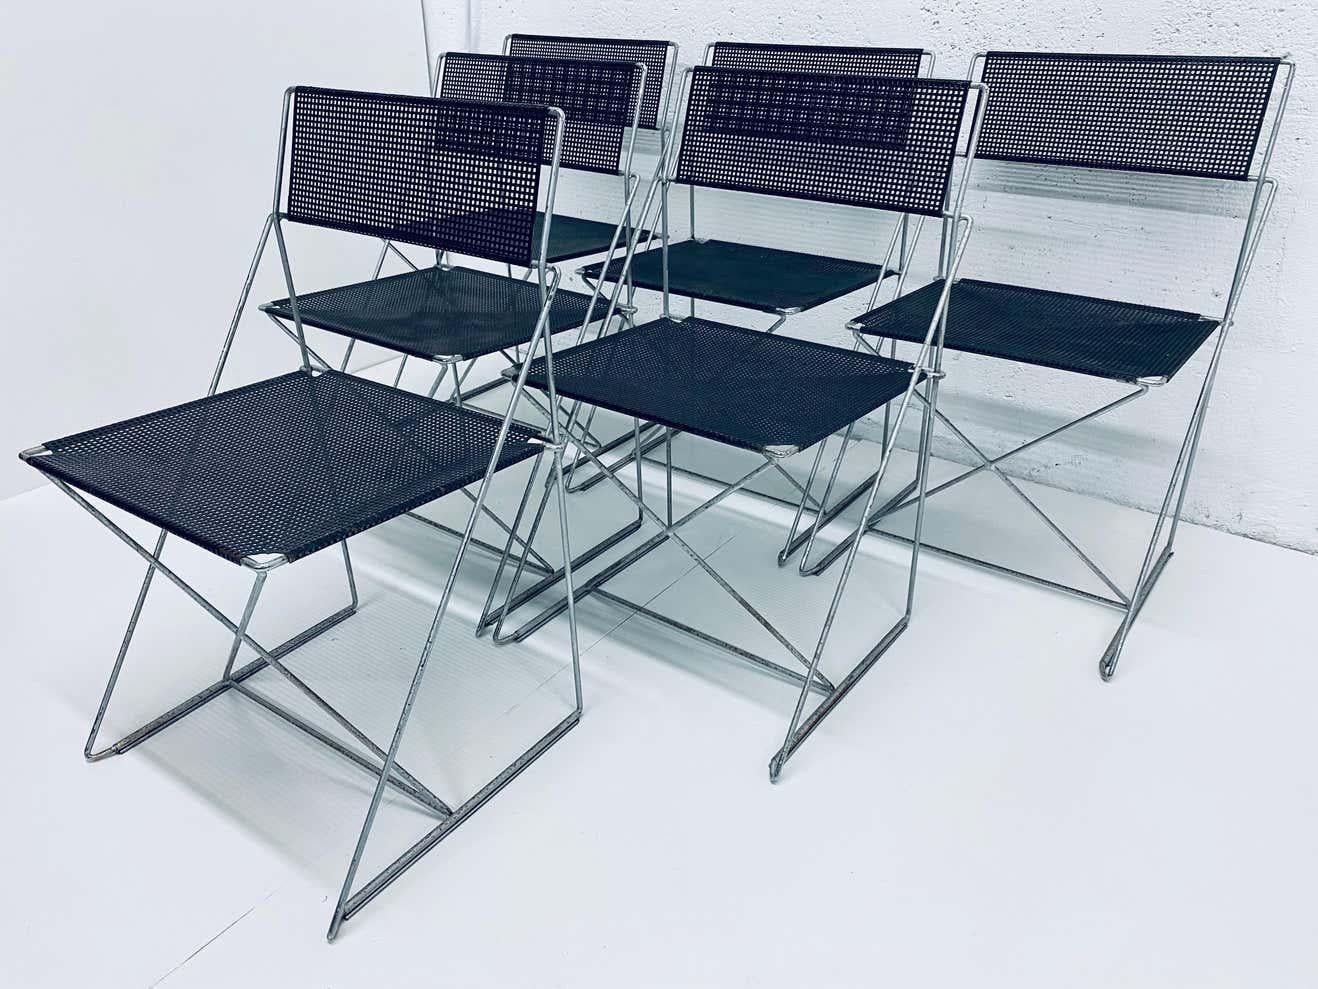 Three pairs of dining chairs in X-line, made of steel rods and black enameled perforated steel backs and seats. Designed by Niels Jorgen Haugesen for Magis. These chairs are in original condition with wear and are stackable. Made in Denmark.